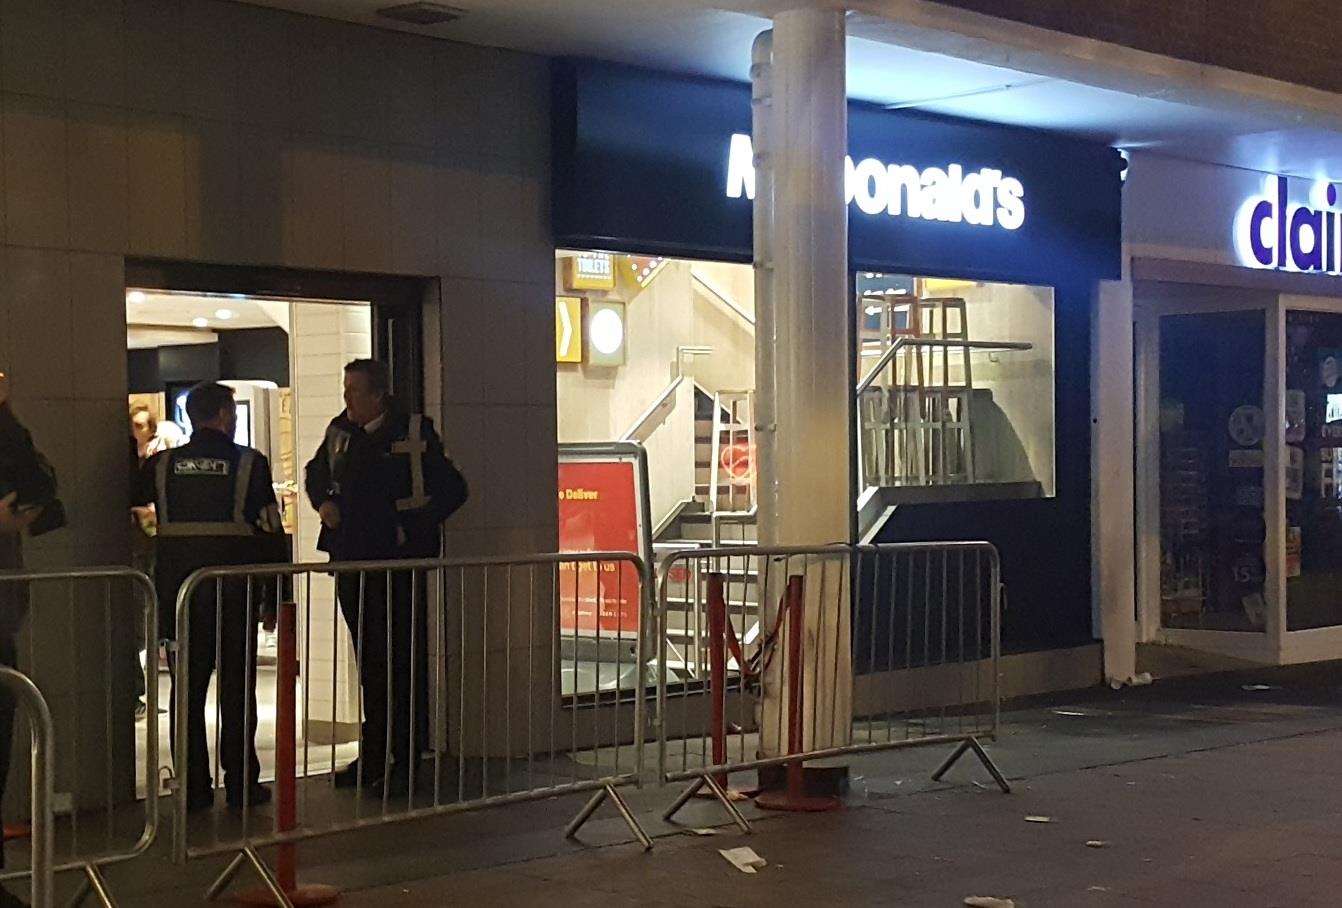 Security outside a McDonald's branch in Canterbury